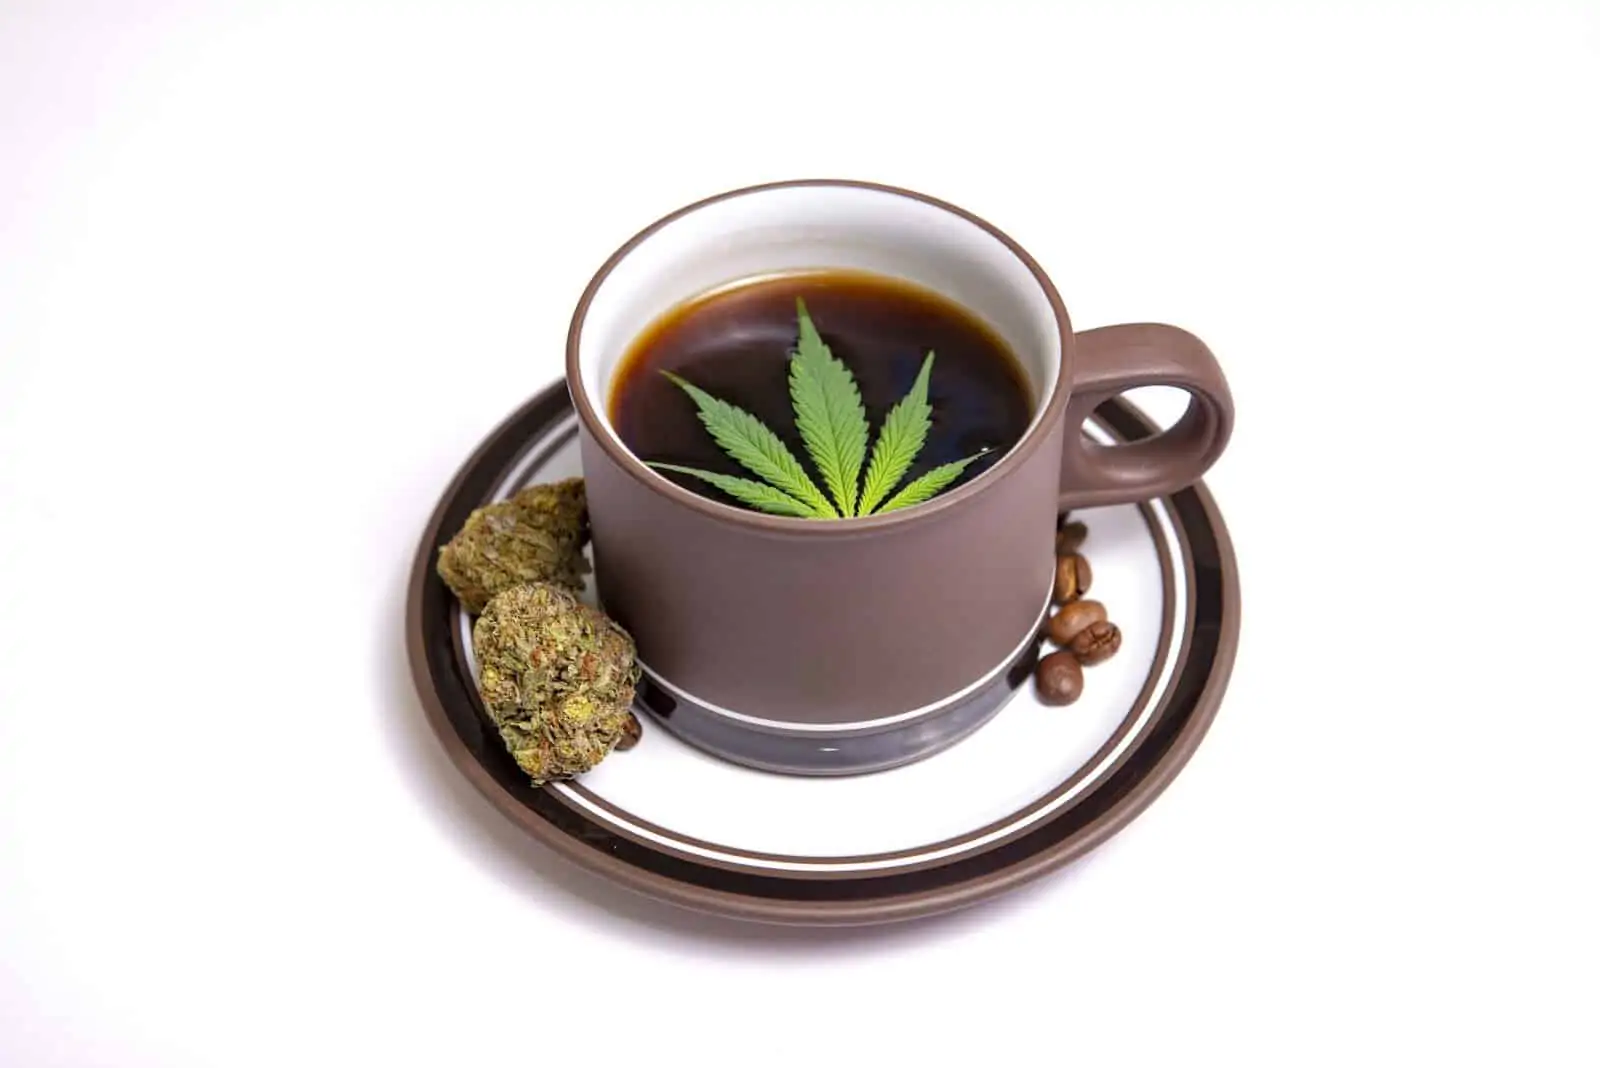 How You Can Make Your Own Cannabis Coffee